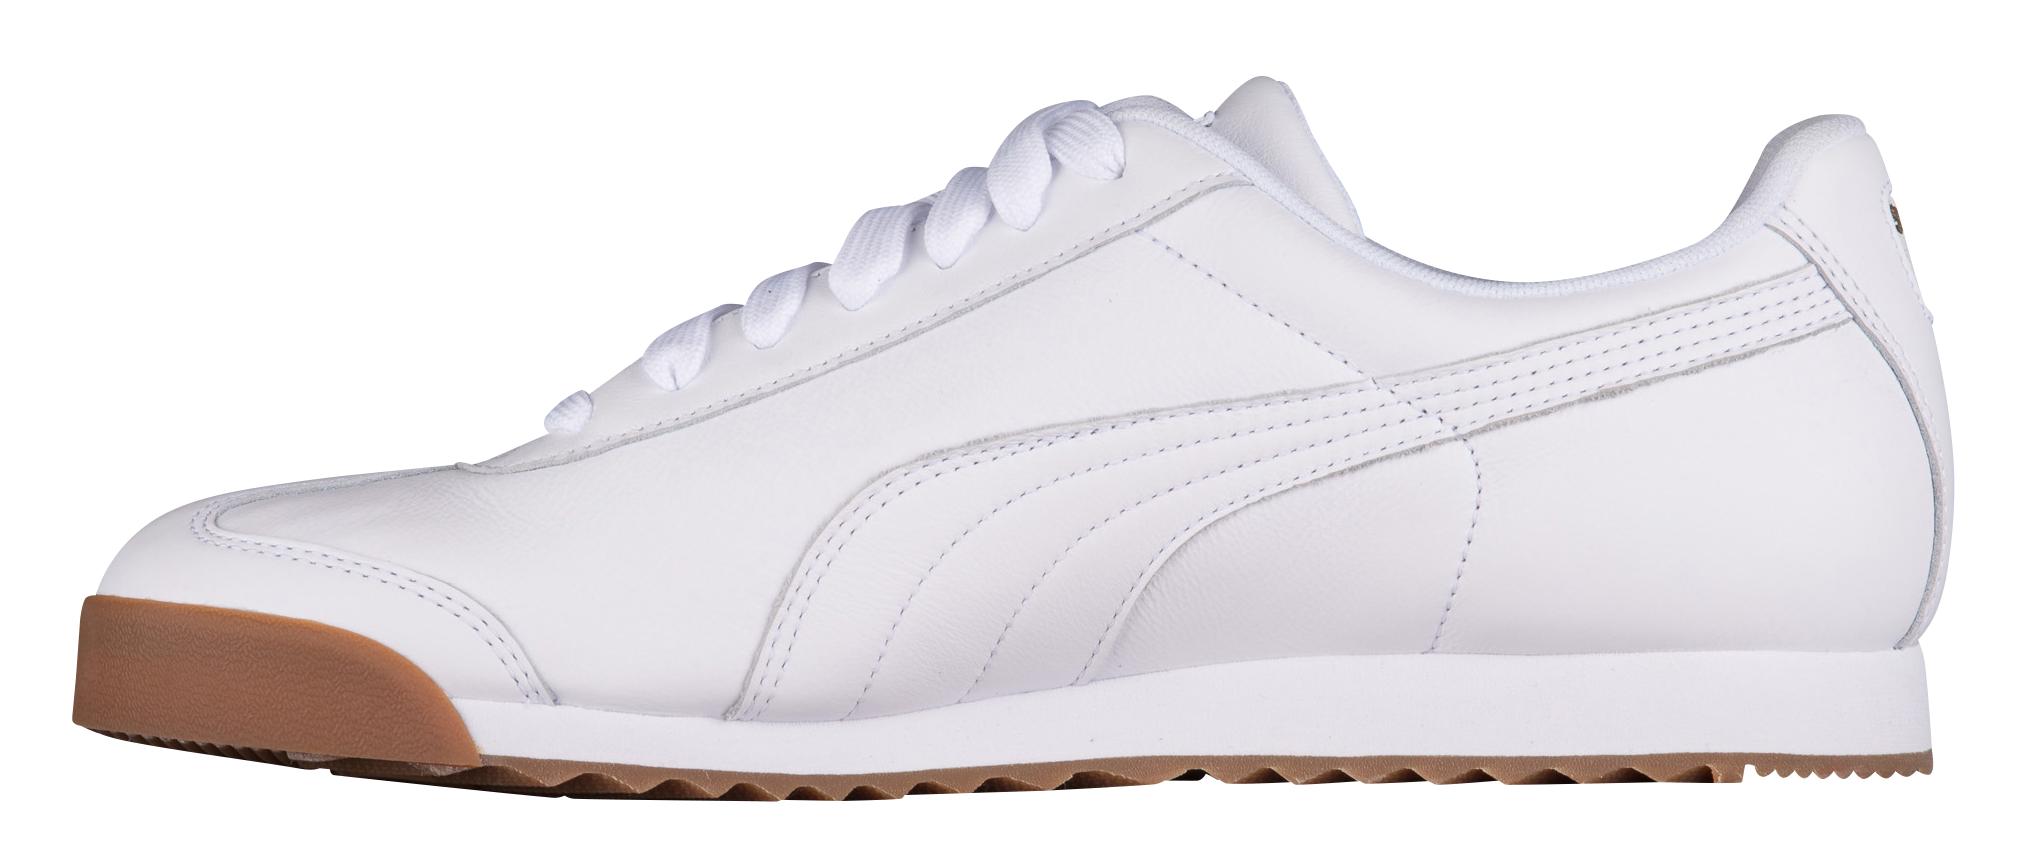 PUMA Leather Roma Classic Gum in White for Men - Save 51% - Lyst